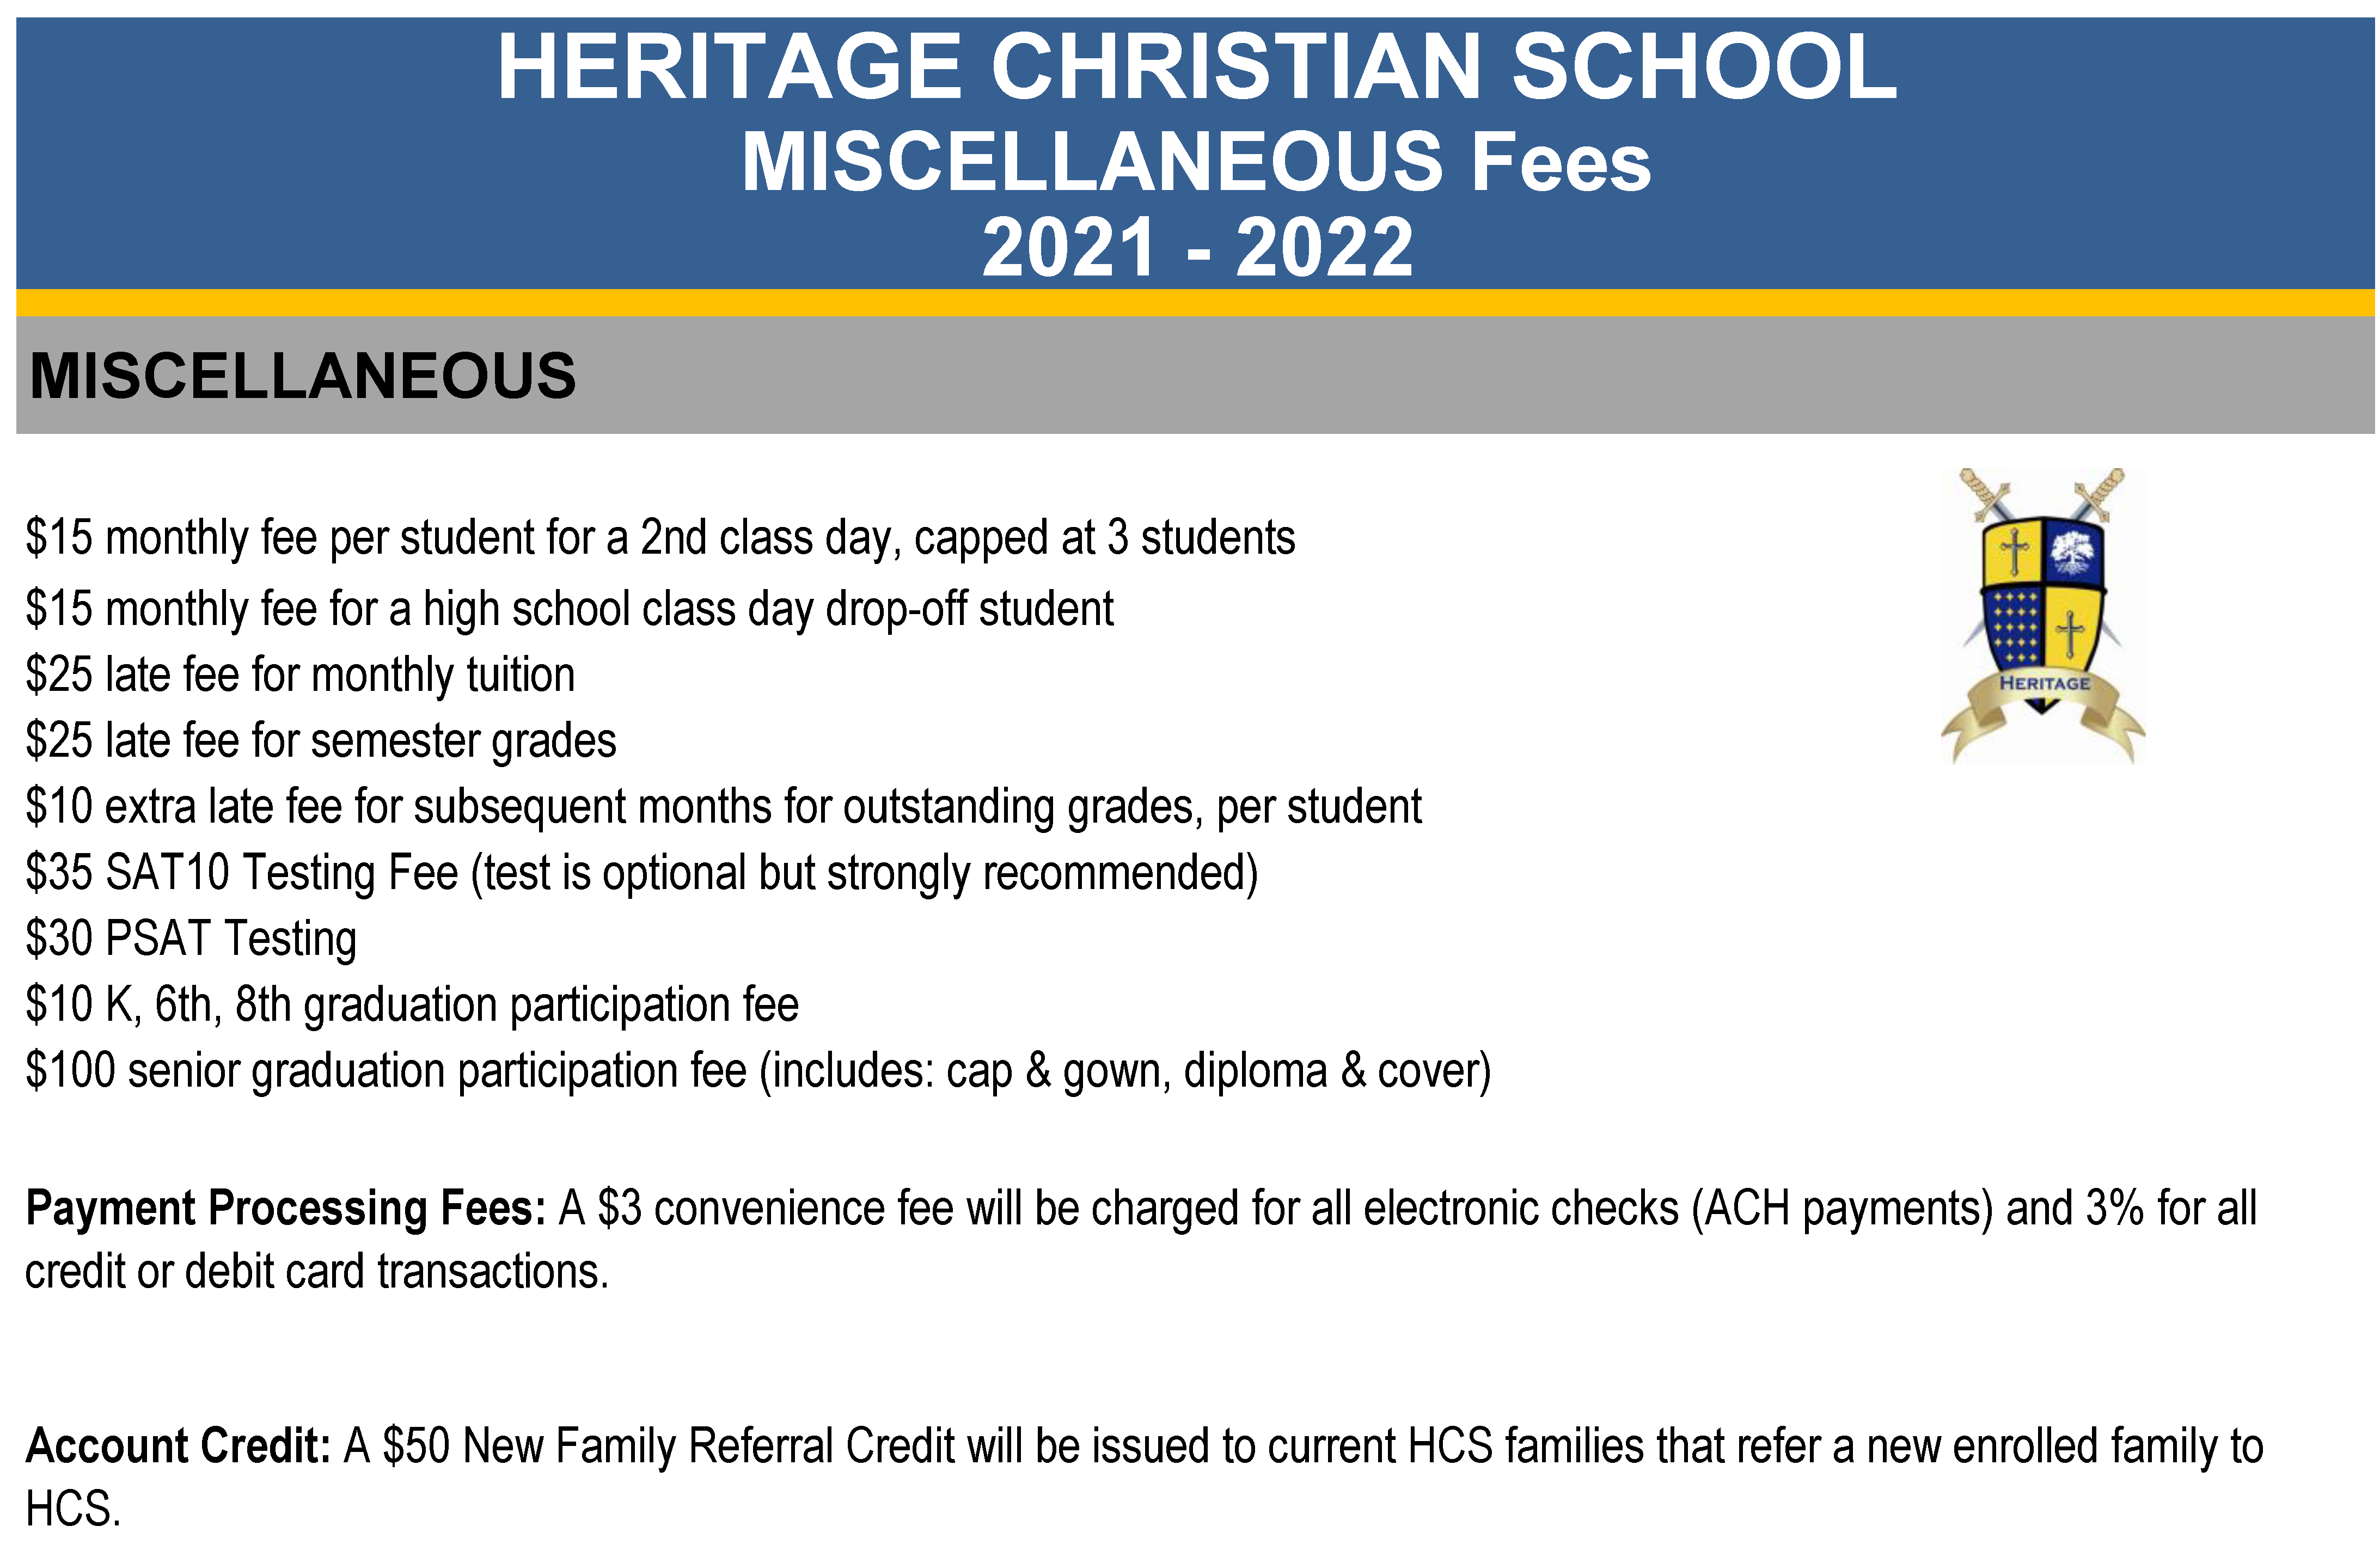 2021-2022 Misc Fees